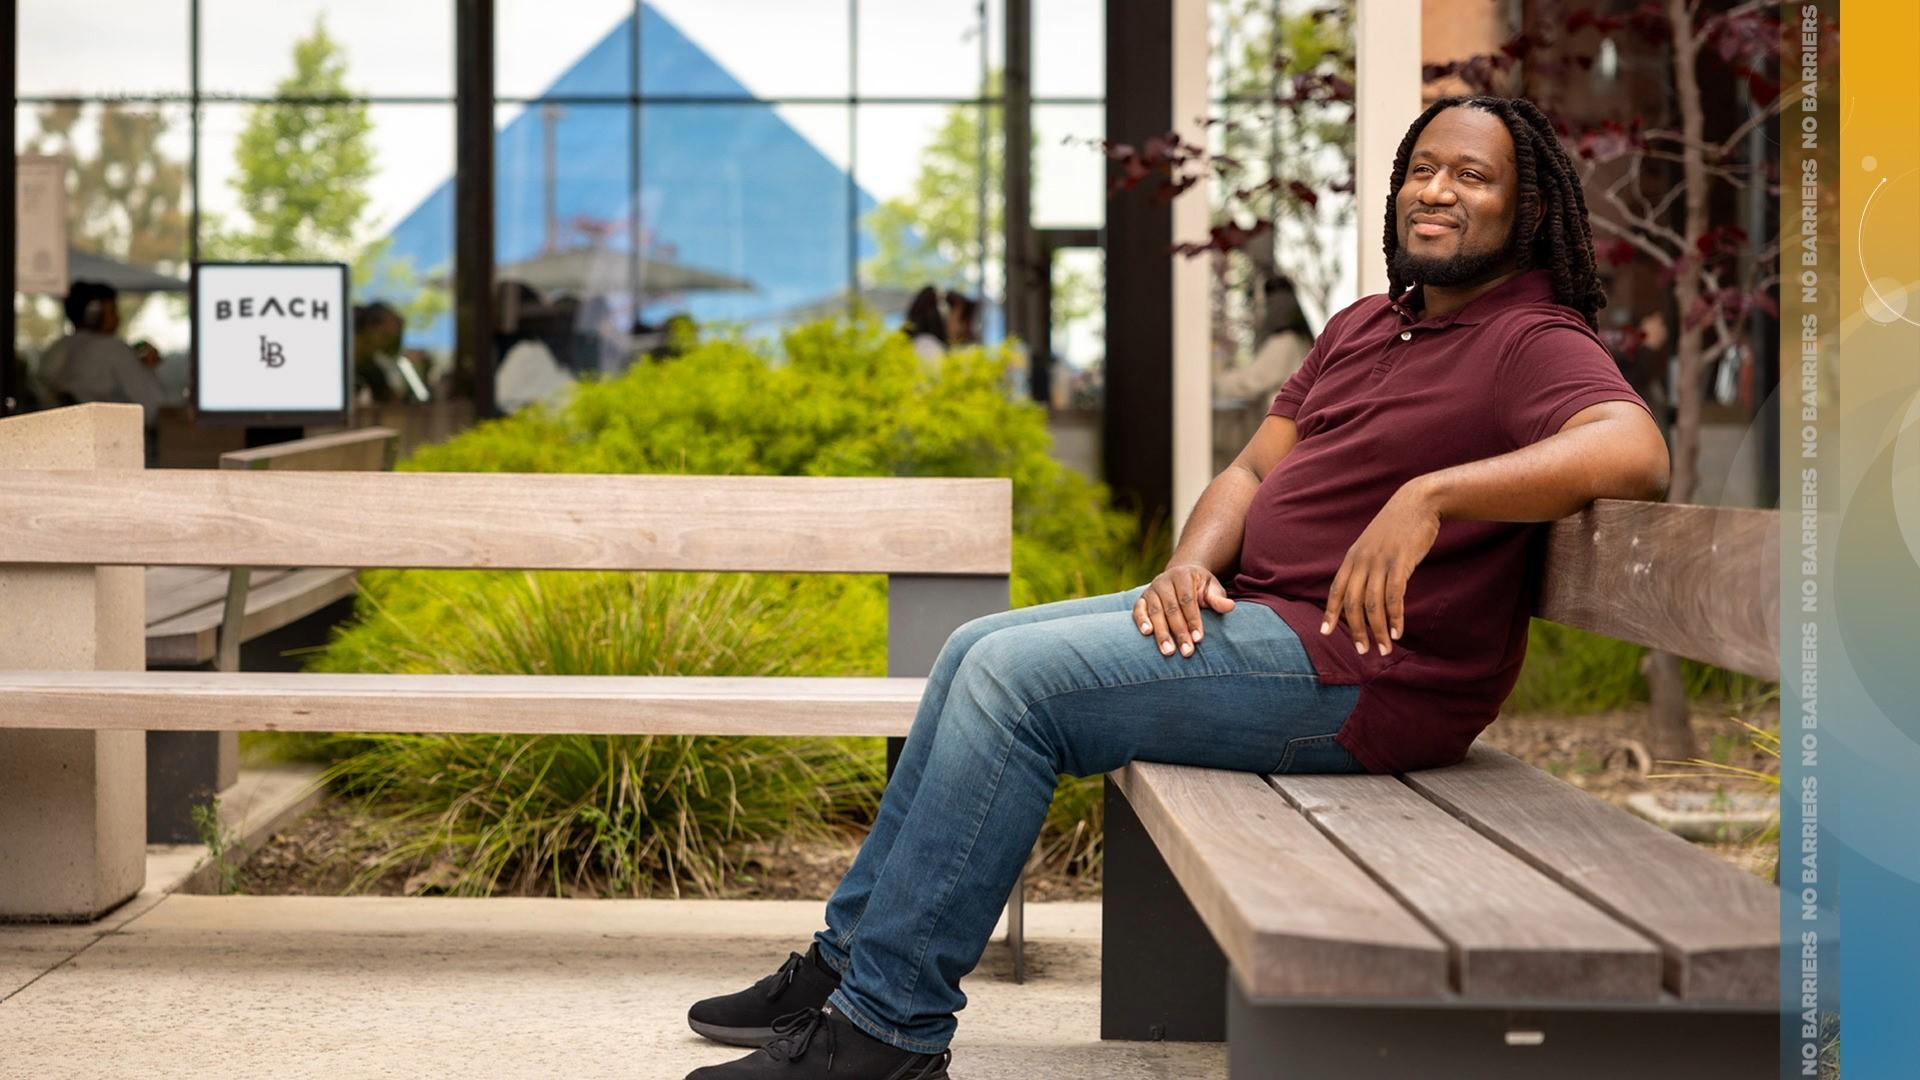 Joshua James, a recipient of the Black Alumni Scholarship, seated at a bench